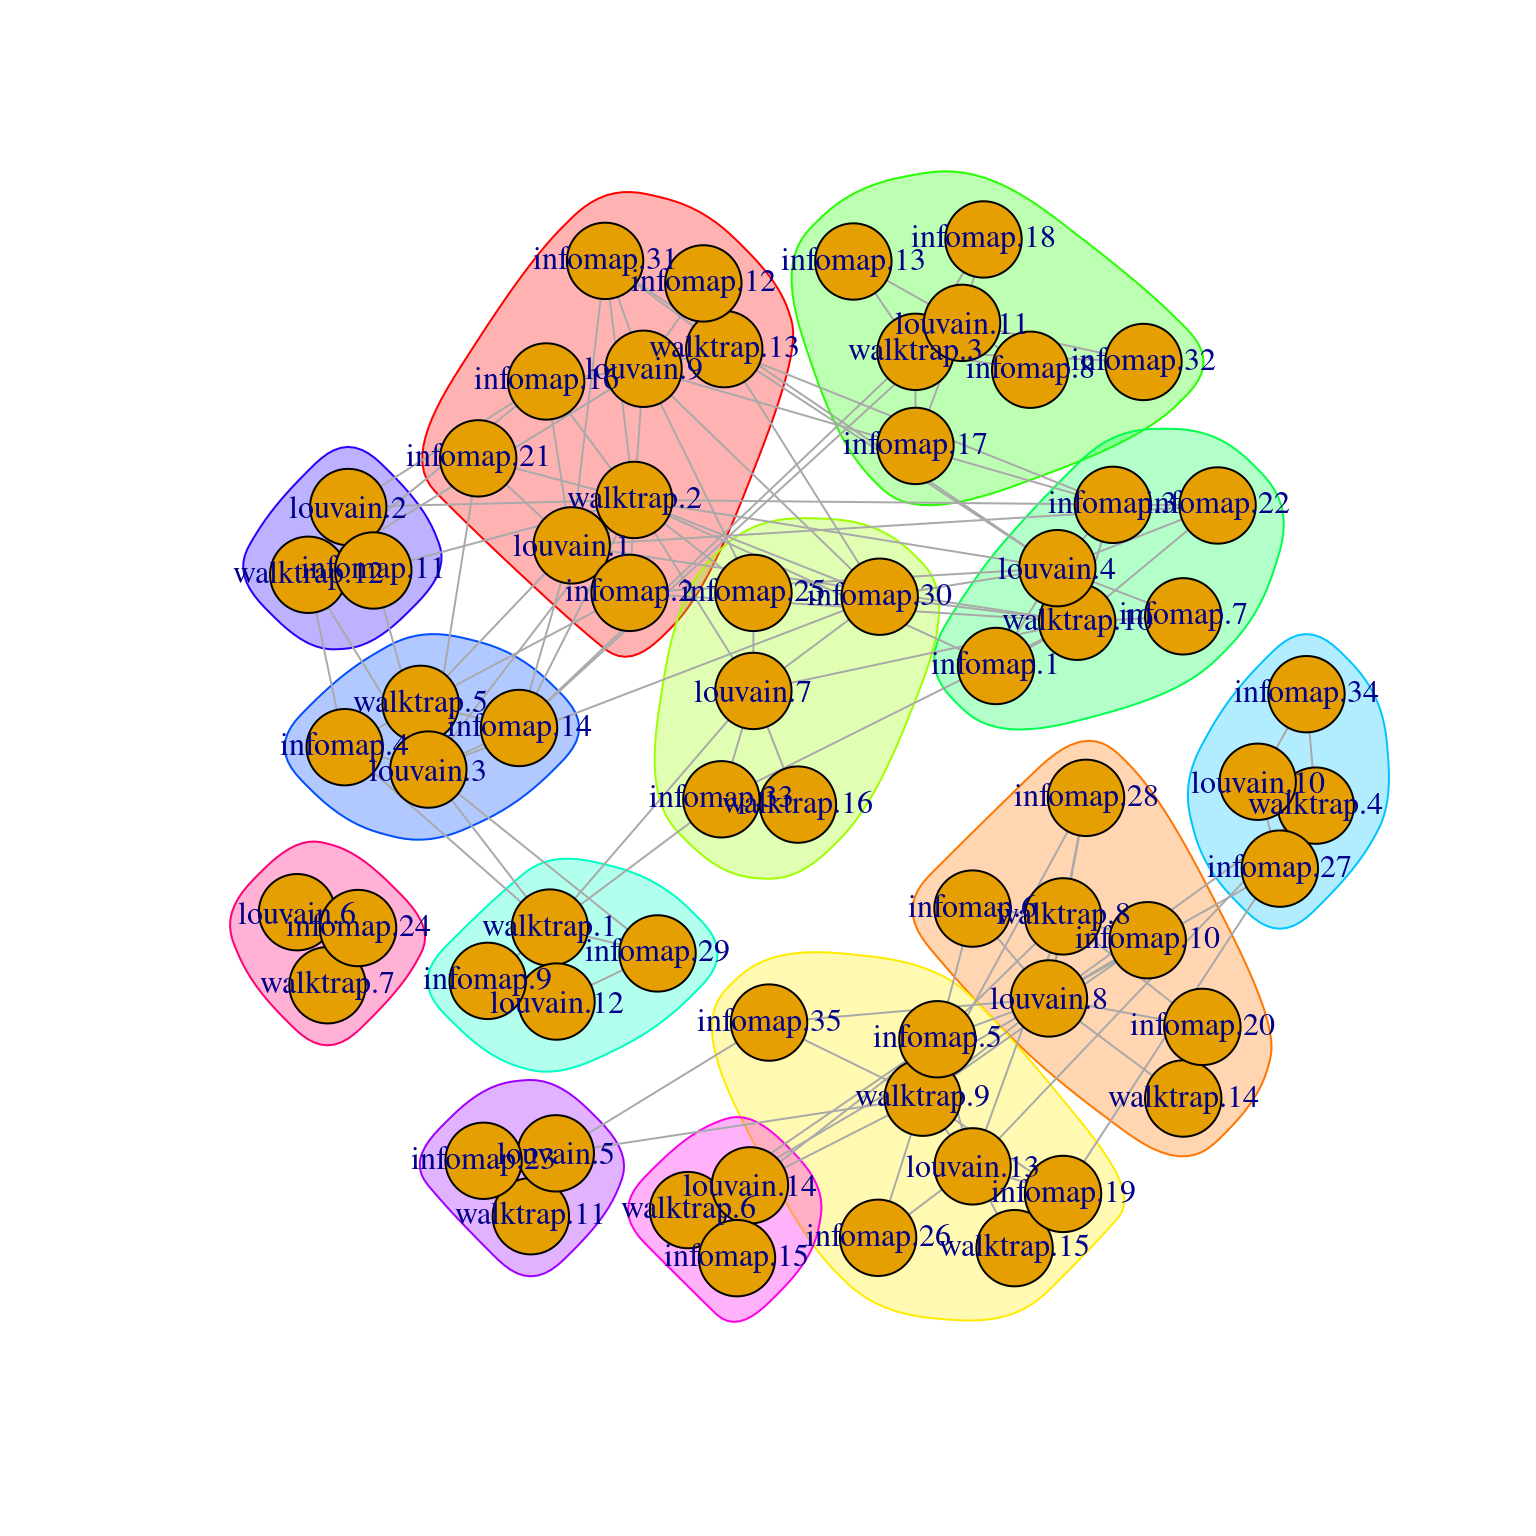 Force-directed layout of the graph of the clusters obtained from different variants of community detection on the PBMC dataset. Each node represents a cluster obtained using one comunity detection method, with colored groupings representing clusters of clusters across different methods.